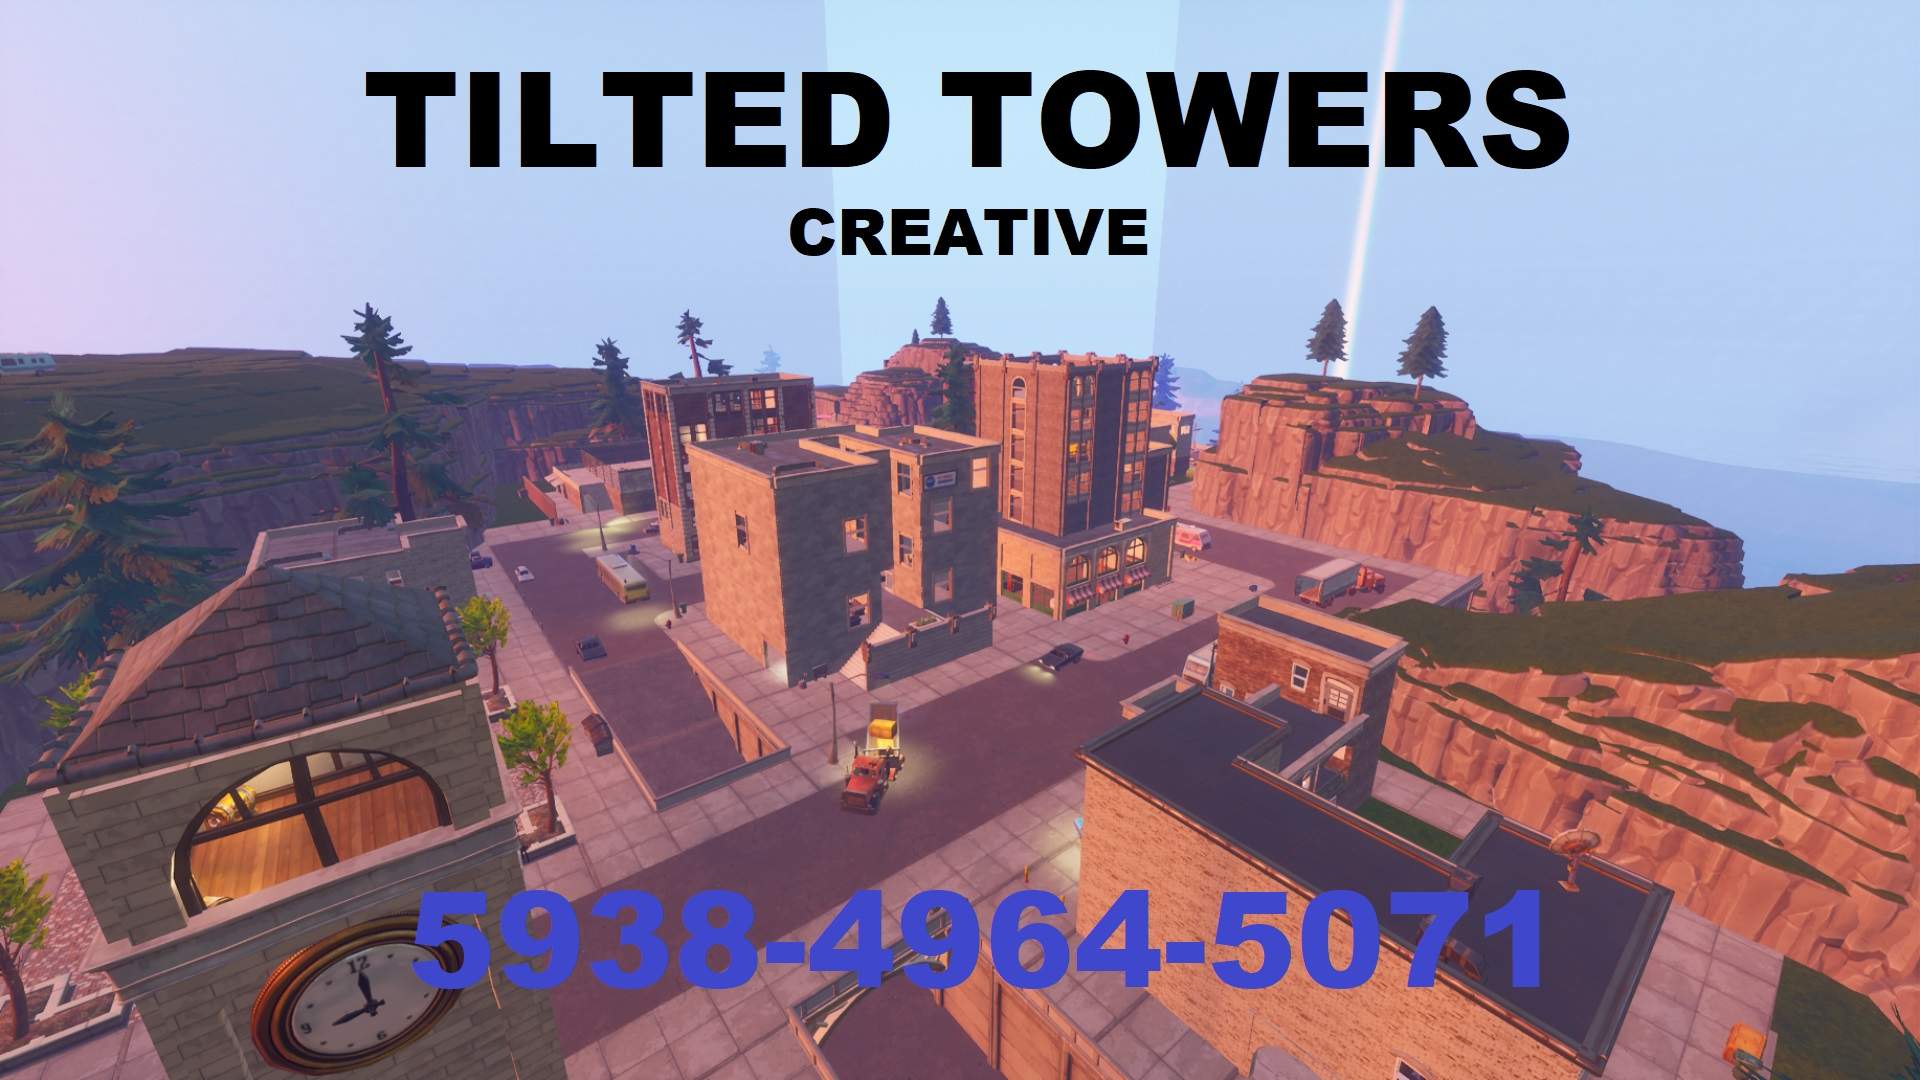 BO2 TOWN (WITH ZOMBIES) - Fortnite Creative Map Code - Dropnite